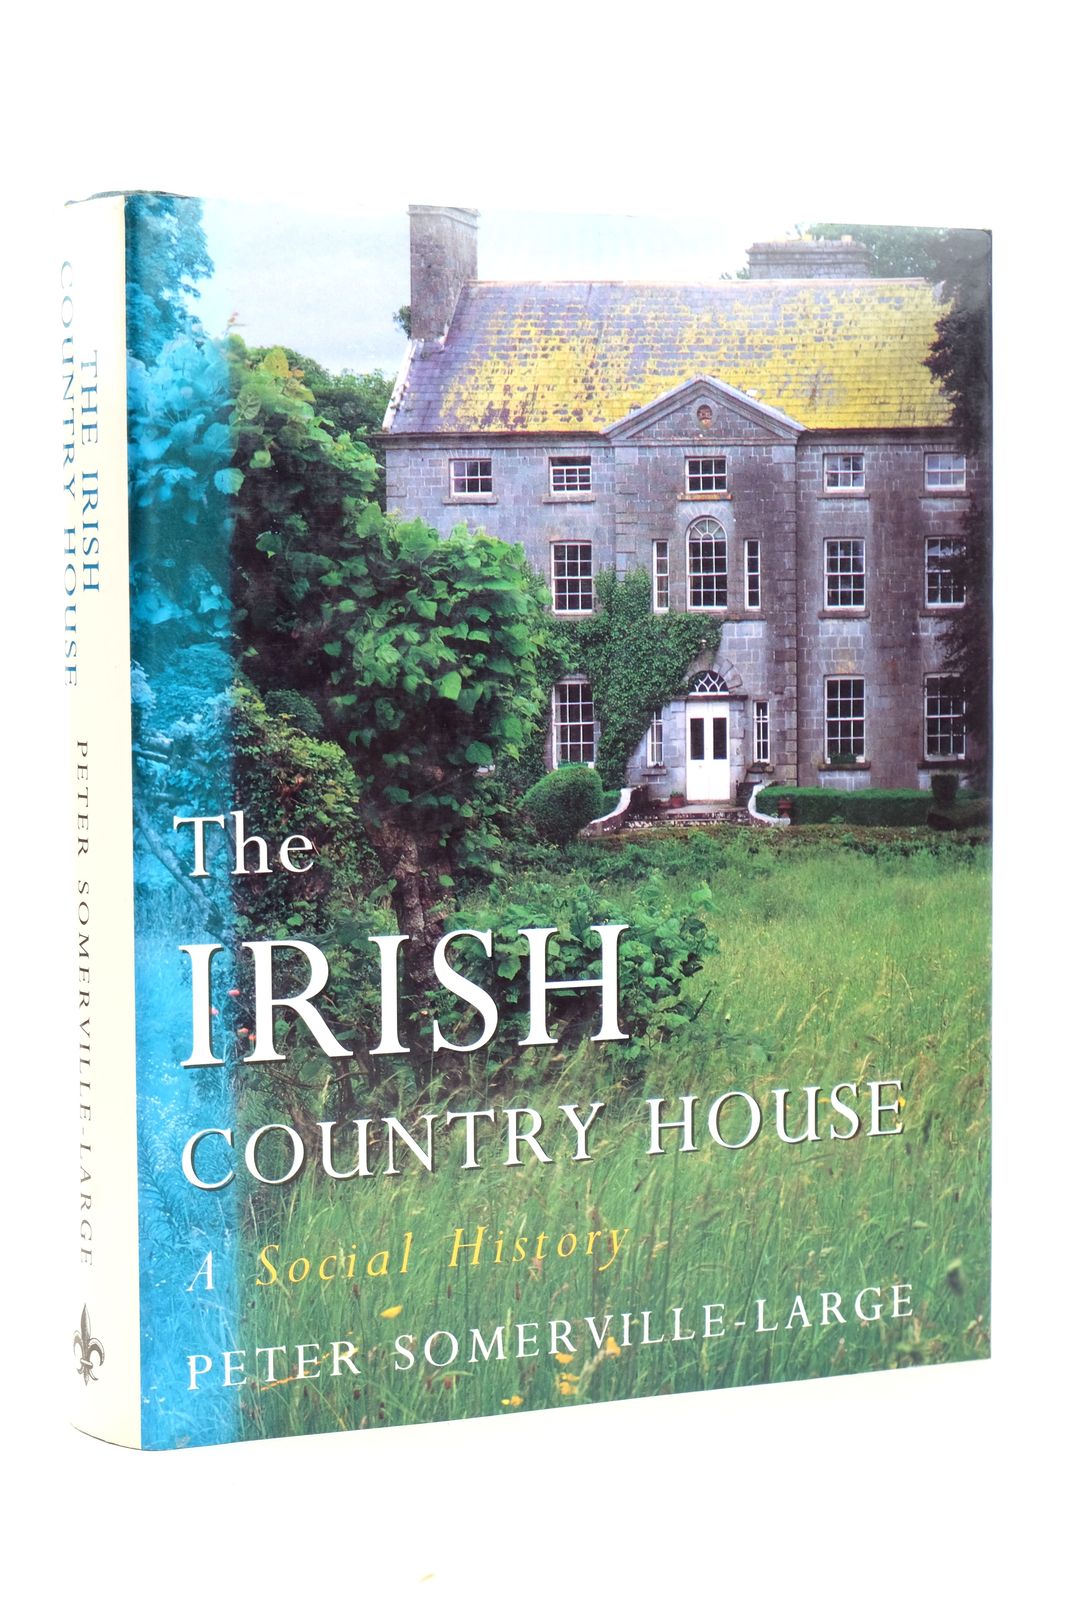 Photo of THE IRISH COUNTRY HOUSE written by Somerville-Large, Peter published by Sinclair-Stevenson Ltd. (STOCK CODE: 1818676)  for sale by Stella & Rose's Books